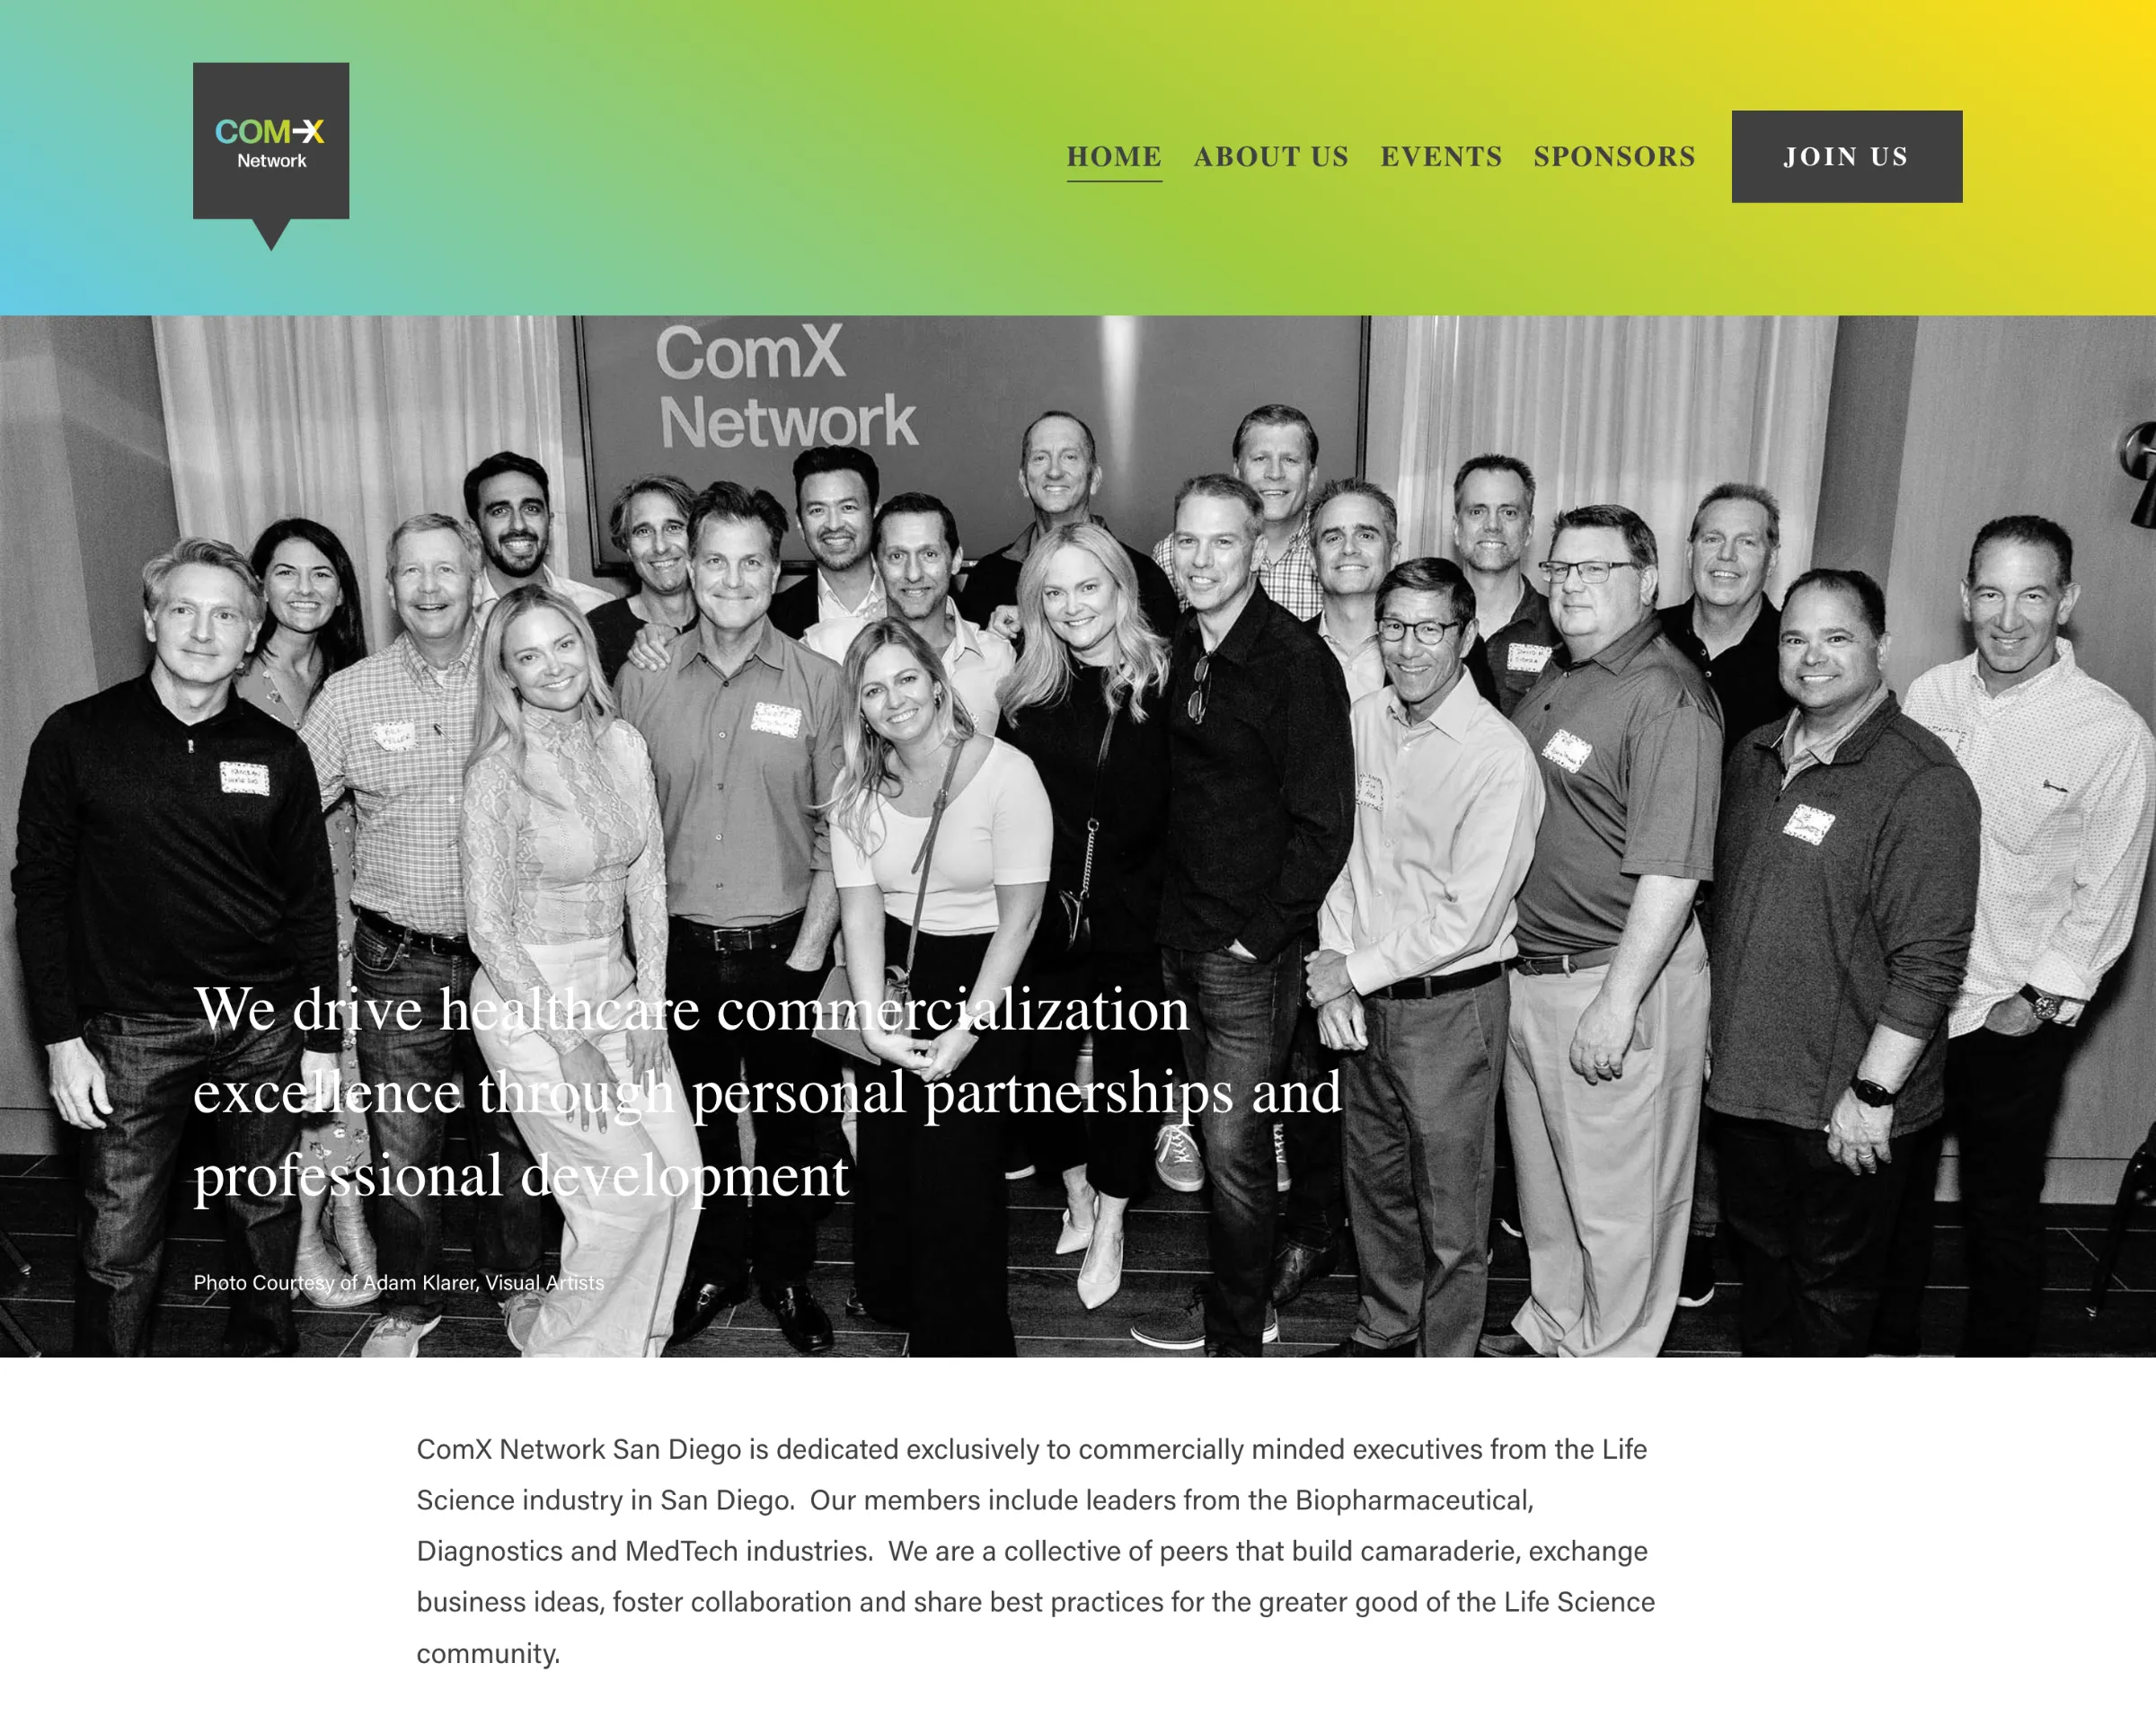 Screenshot of Home Page above the fold, featuring group photo at the networking event for commercially minded executives from the Life Sciences in San Diego.